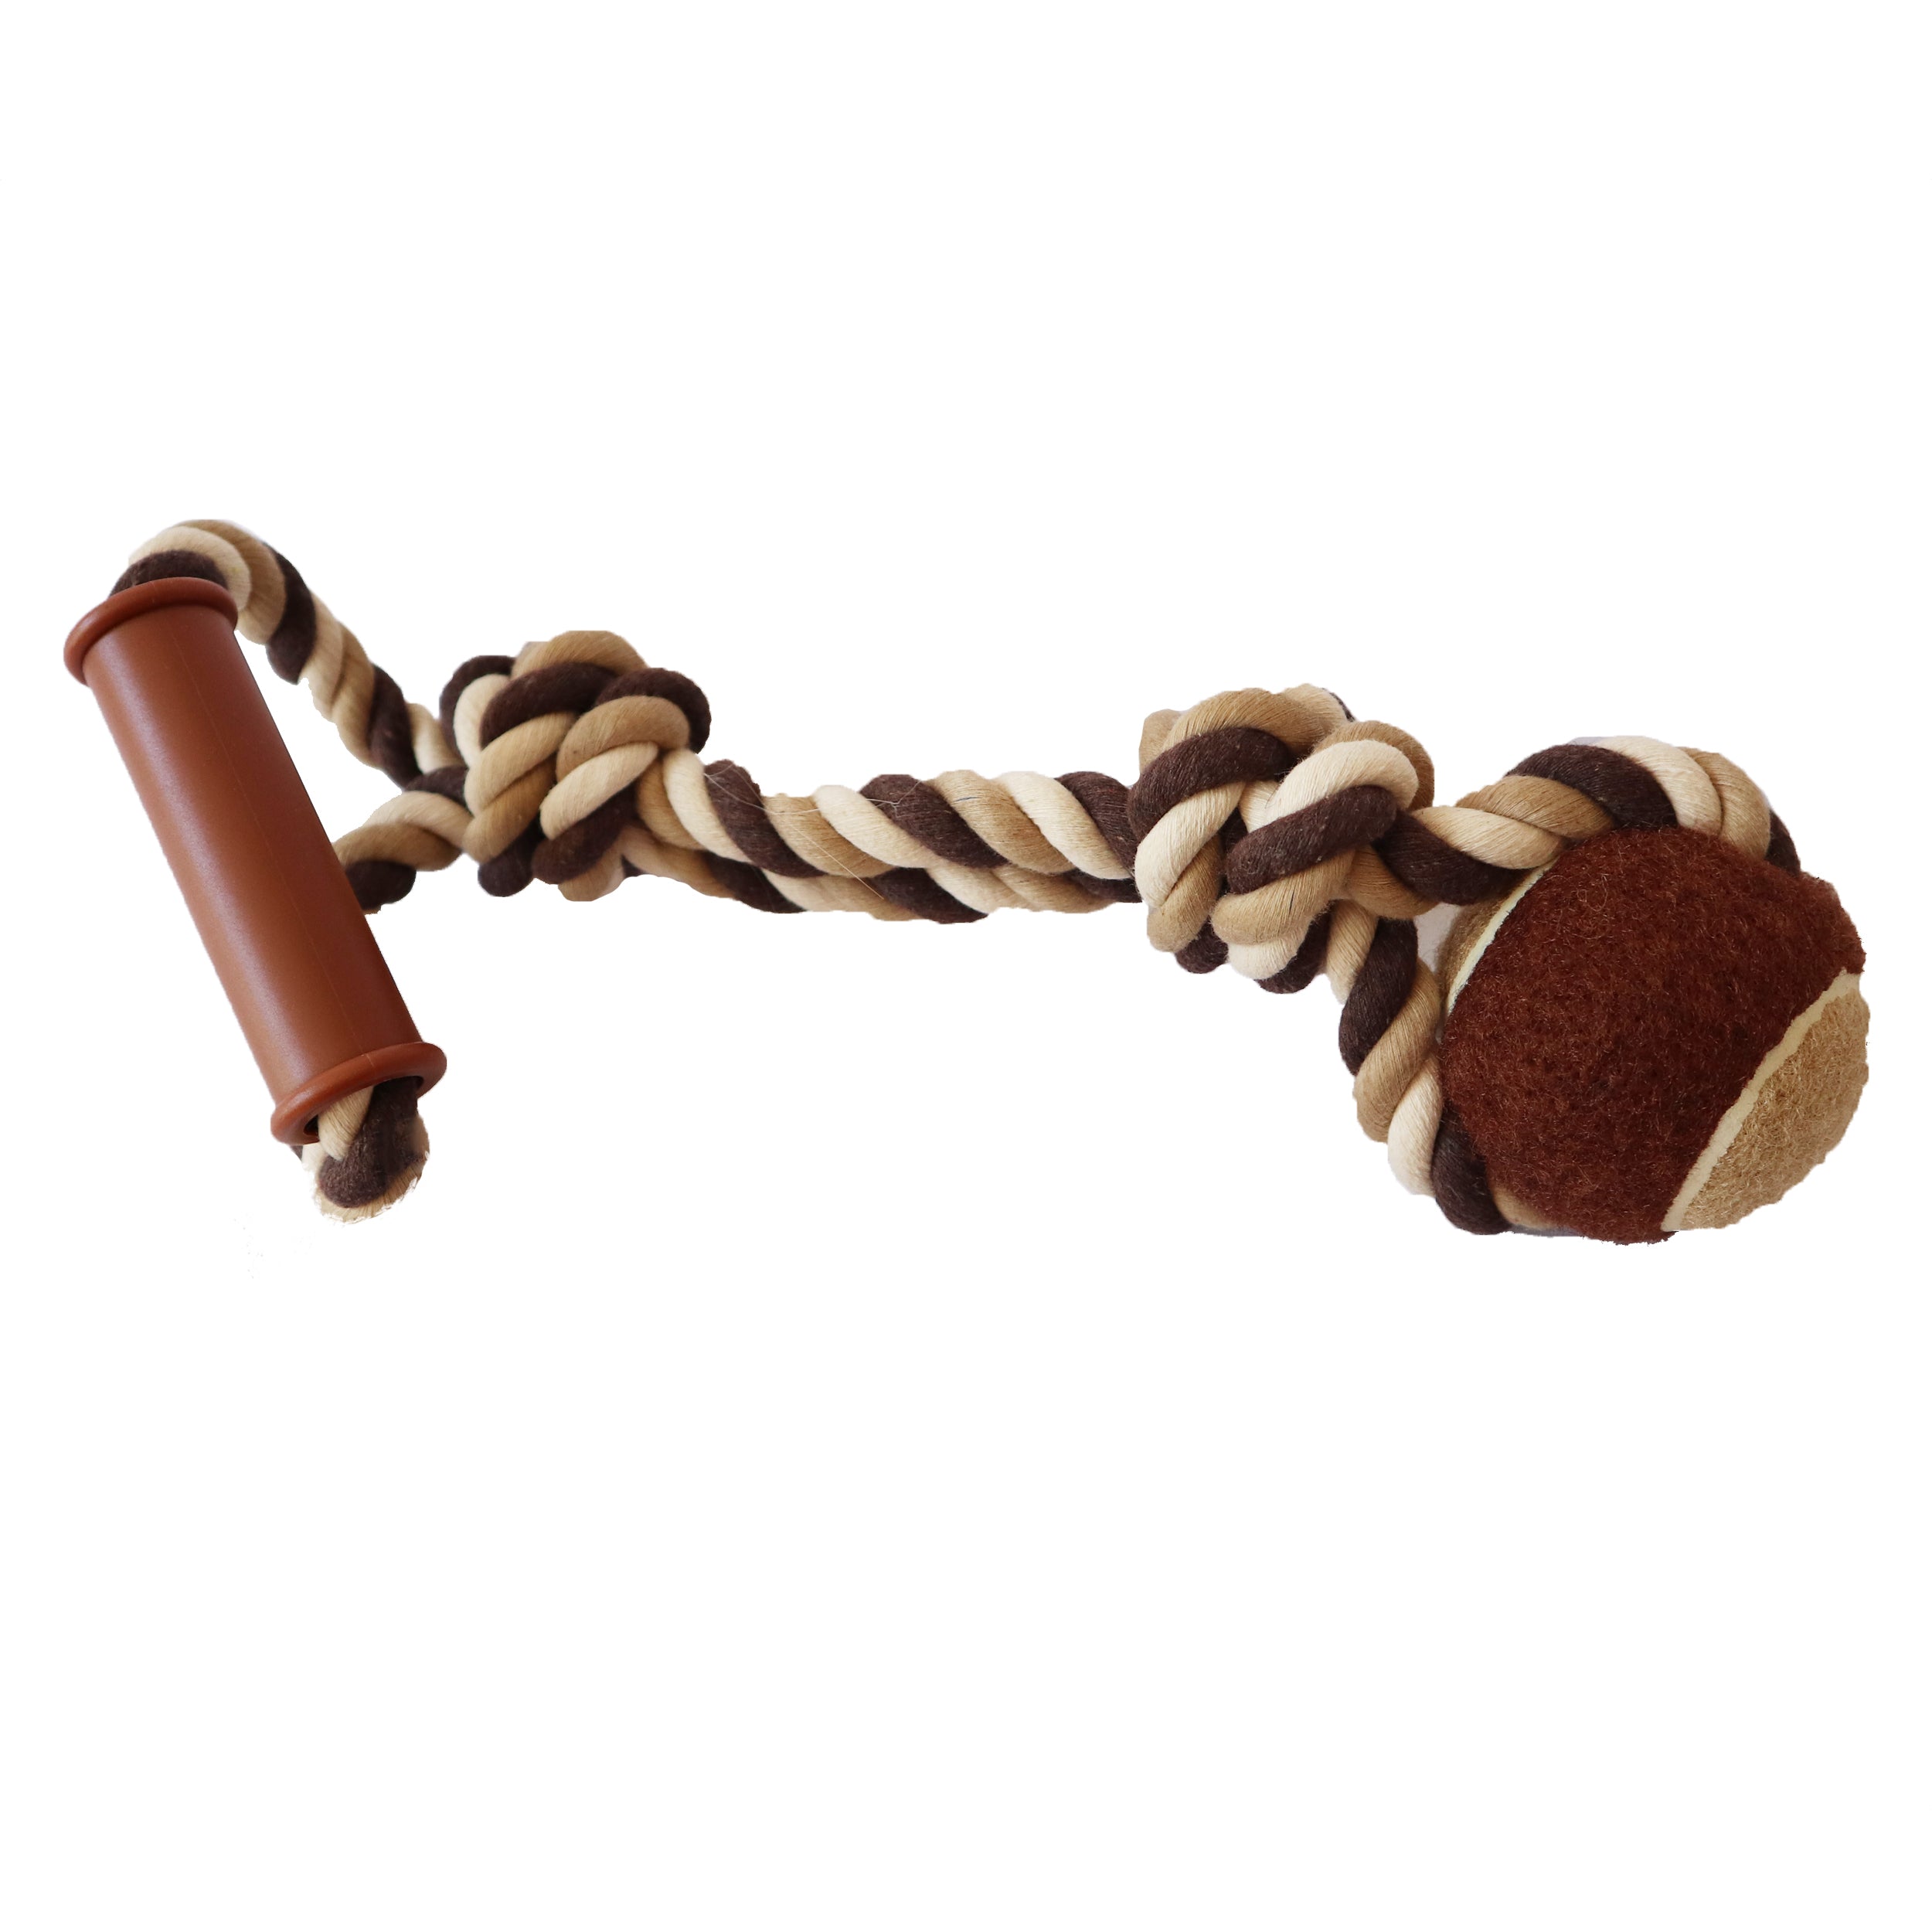 [Dog Toy] Twist Braided Knotted Rope with Tennis Ball and Handle Tugging Dog Toy 15"